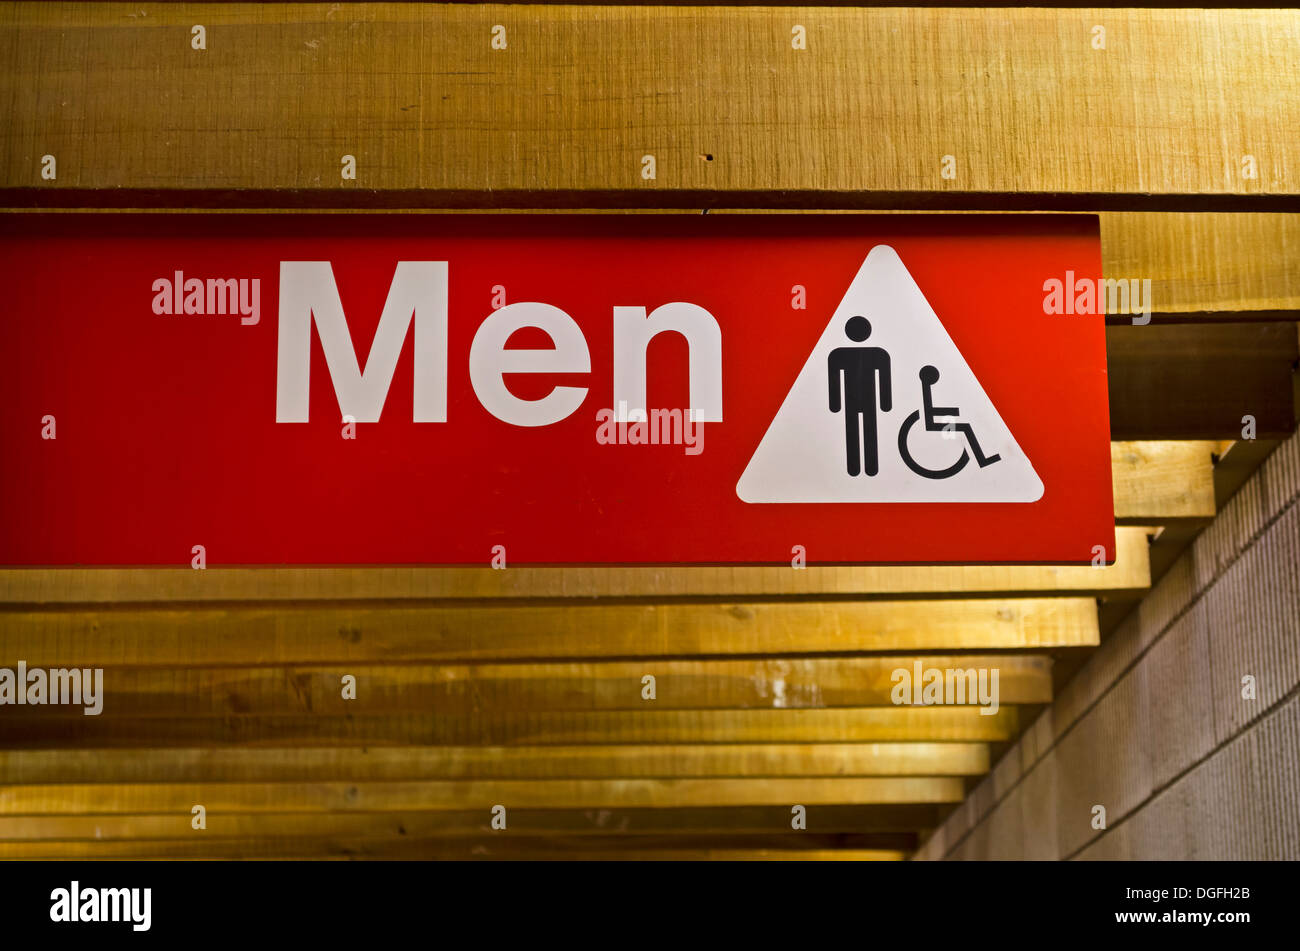 Men's public washroom toilet sign.   Bathroom sign for men and people with handicaps or disabilities. Stock Photo